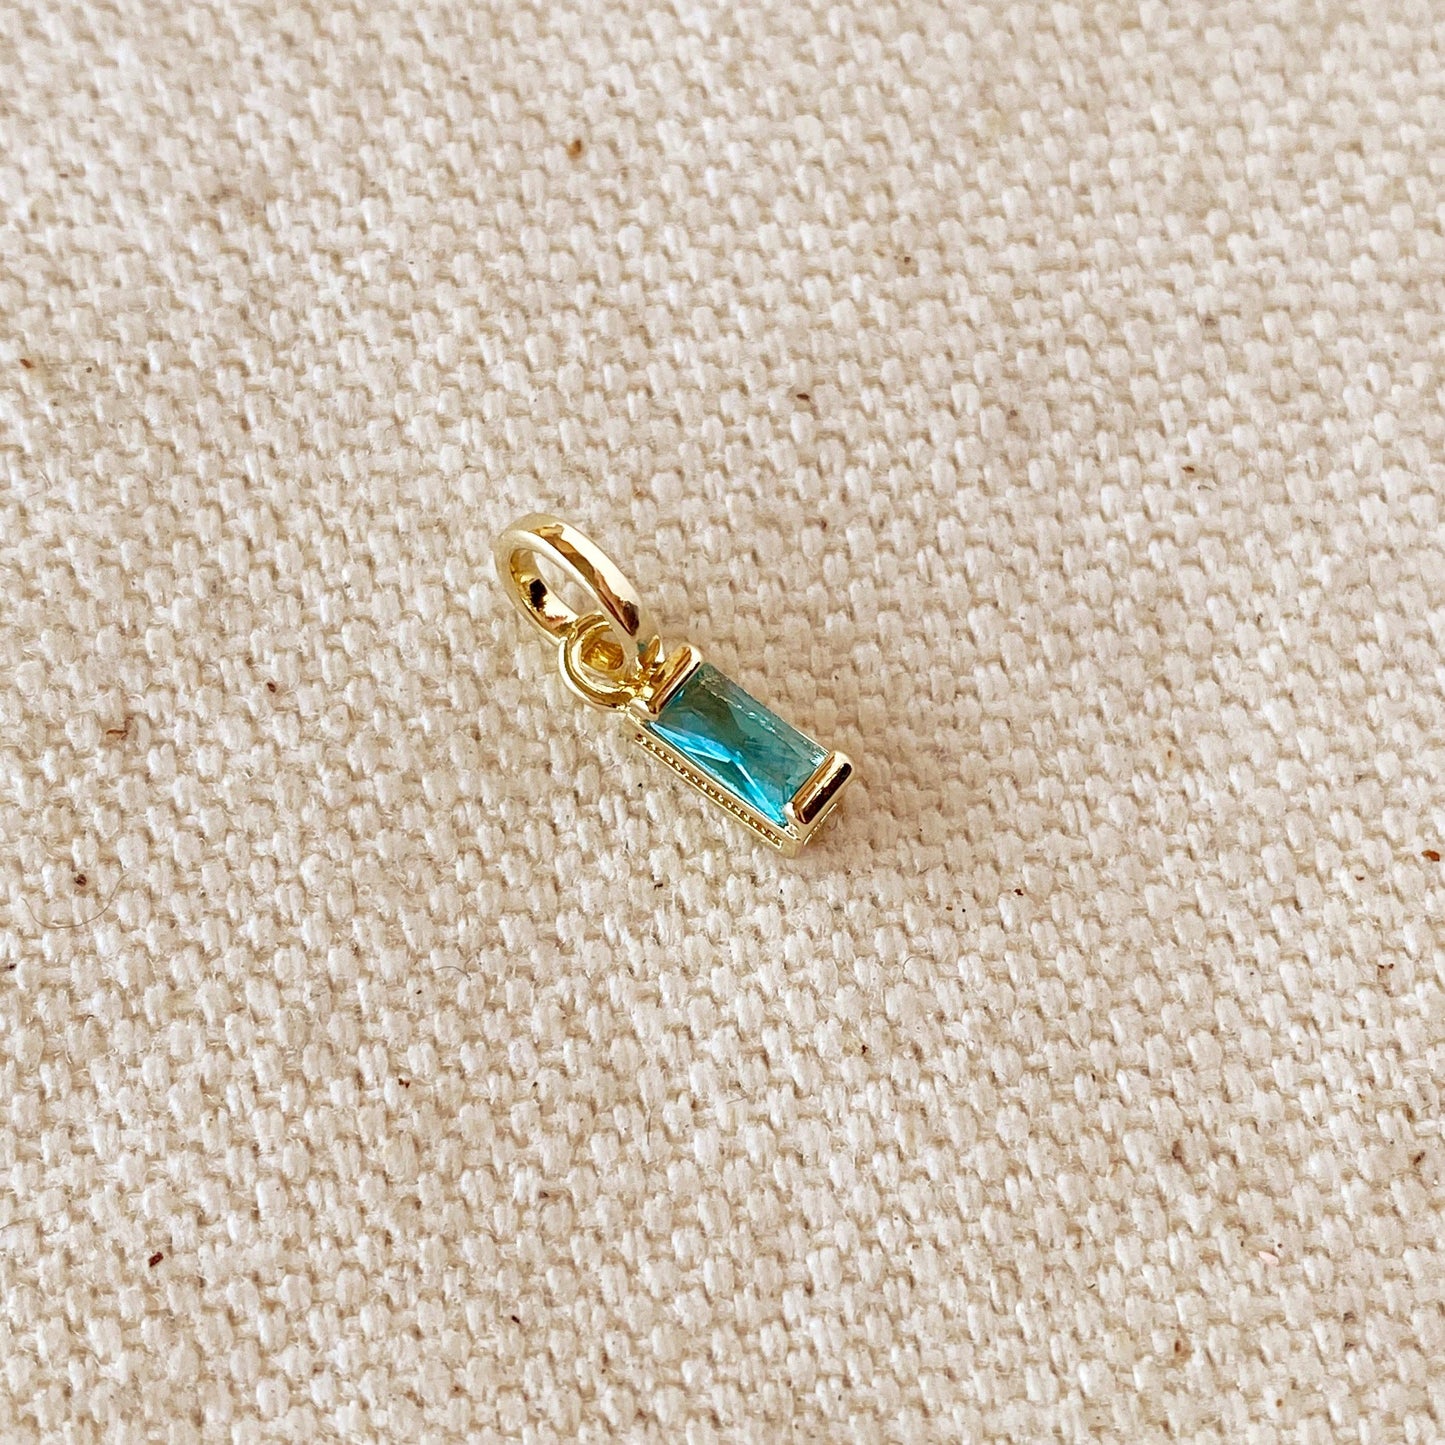 18k Gold Filled Baguette Birthstone Charm with Chain